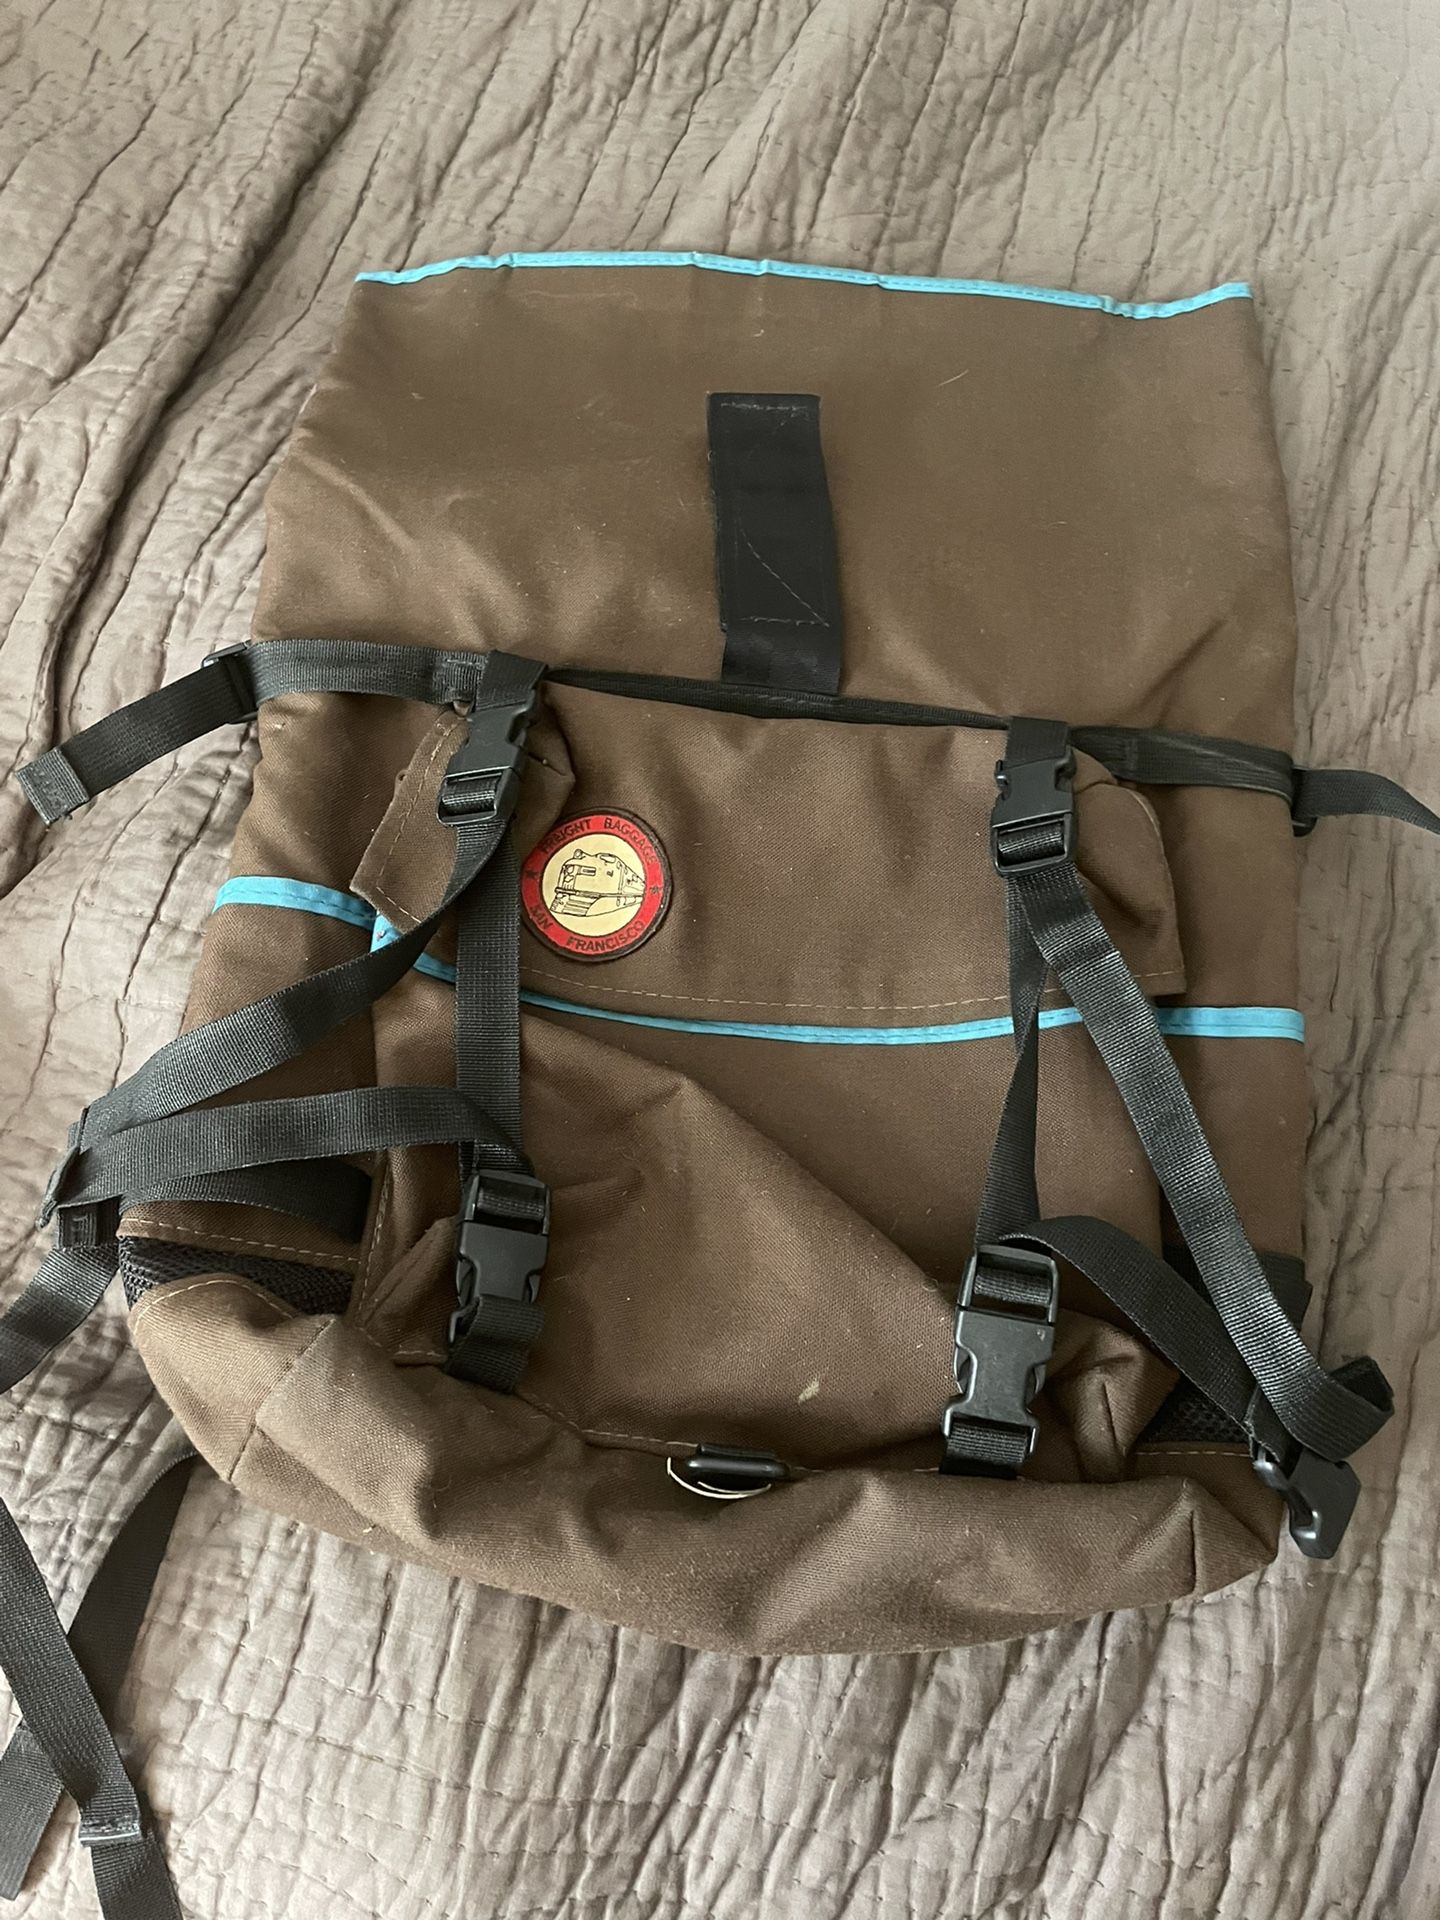 Freight baggage Cycling Rolltop Backpack for Sale in Chicago, IL - OfferUp